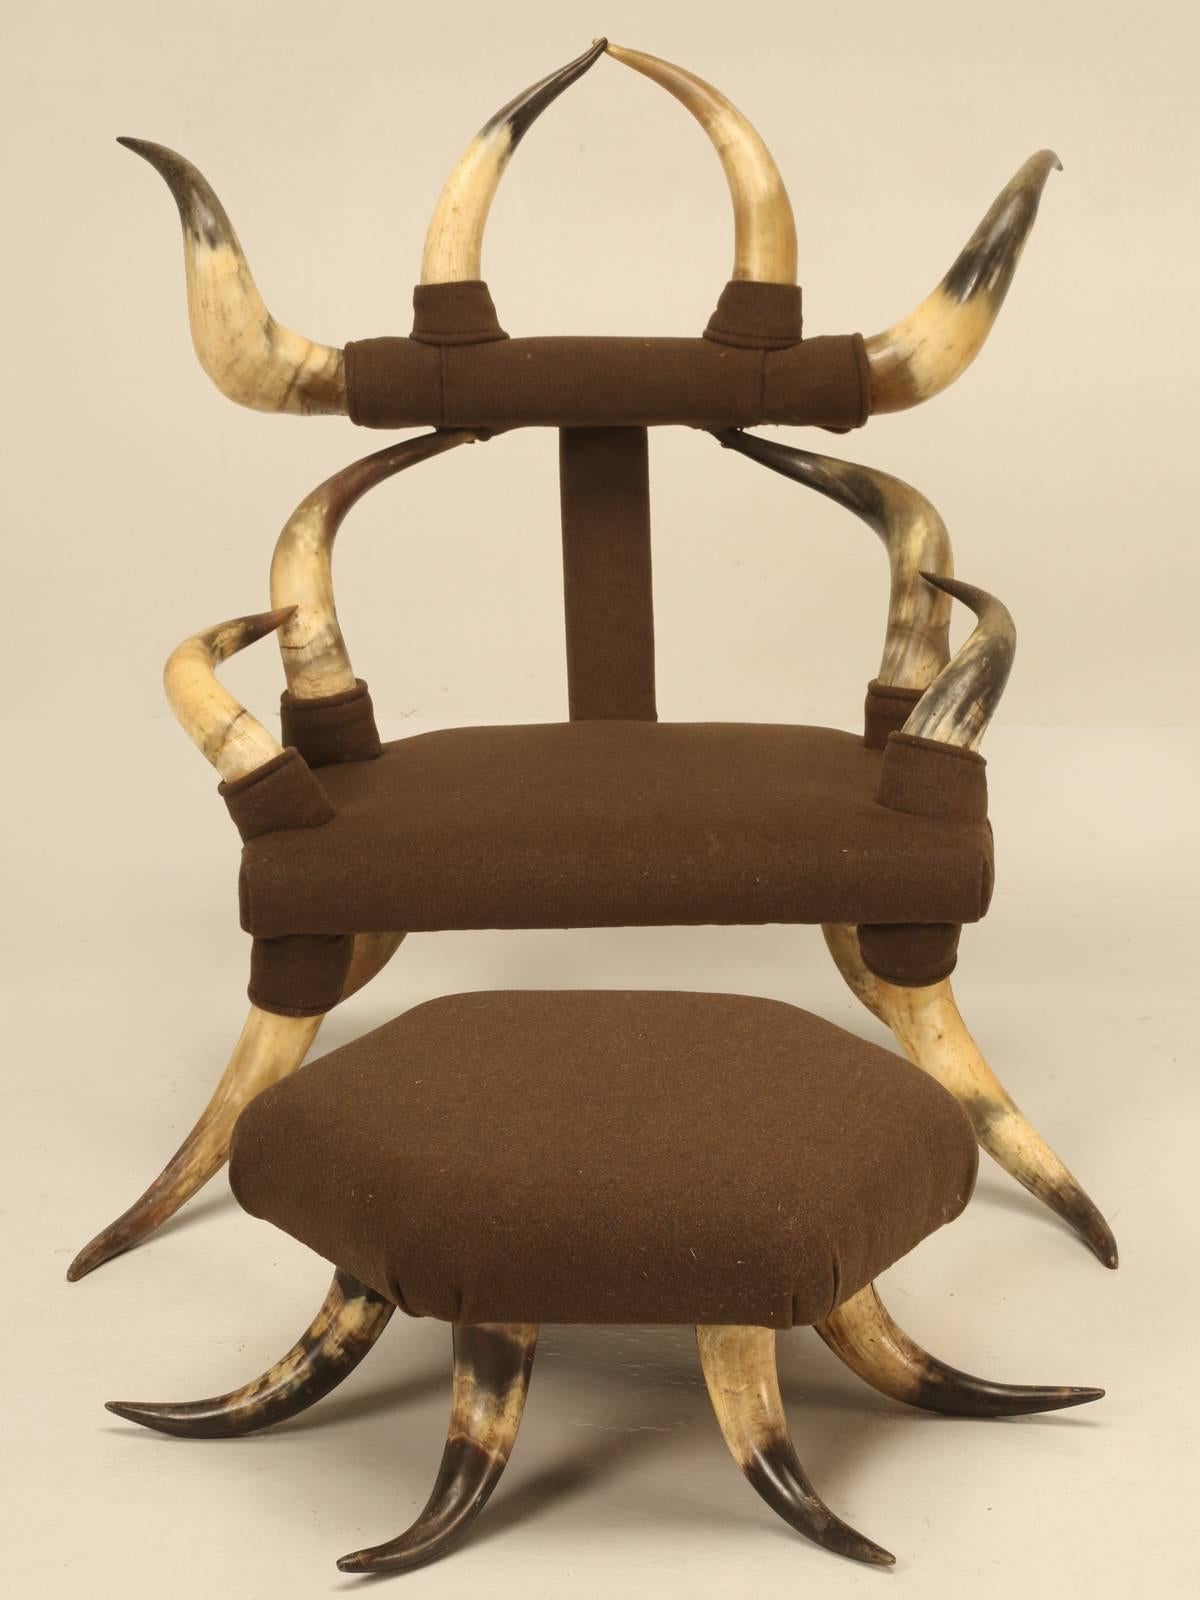 American child’s Texas horn chair with matching horn foot stool, probably made in the late 1800s and in exceptional condition. The fabric appears to be wool and both items match. No prior repairs, nor none required. 

Measurements provided are for